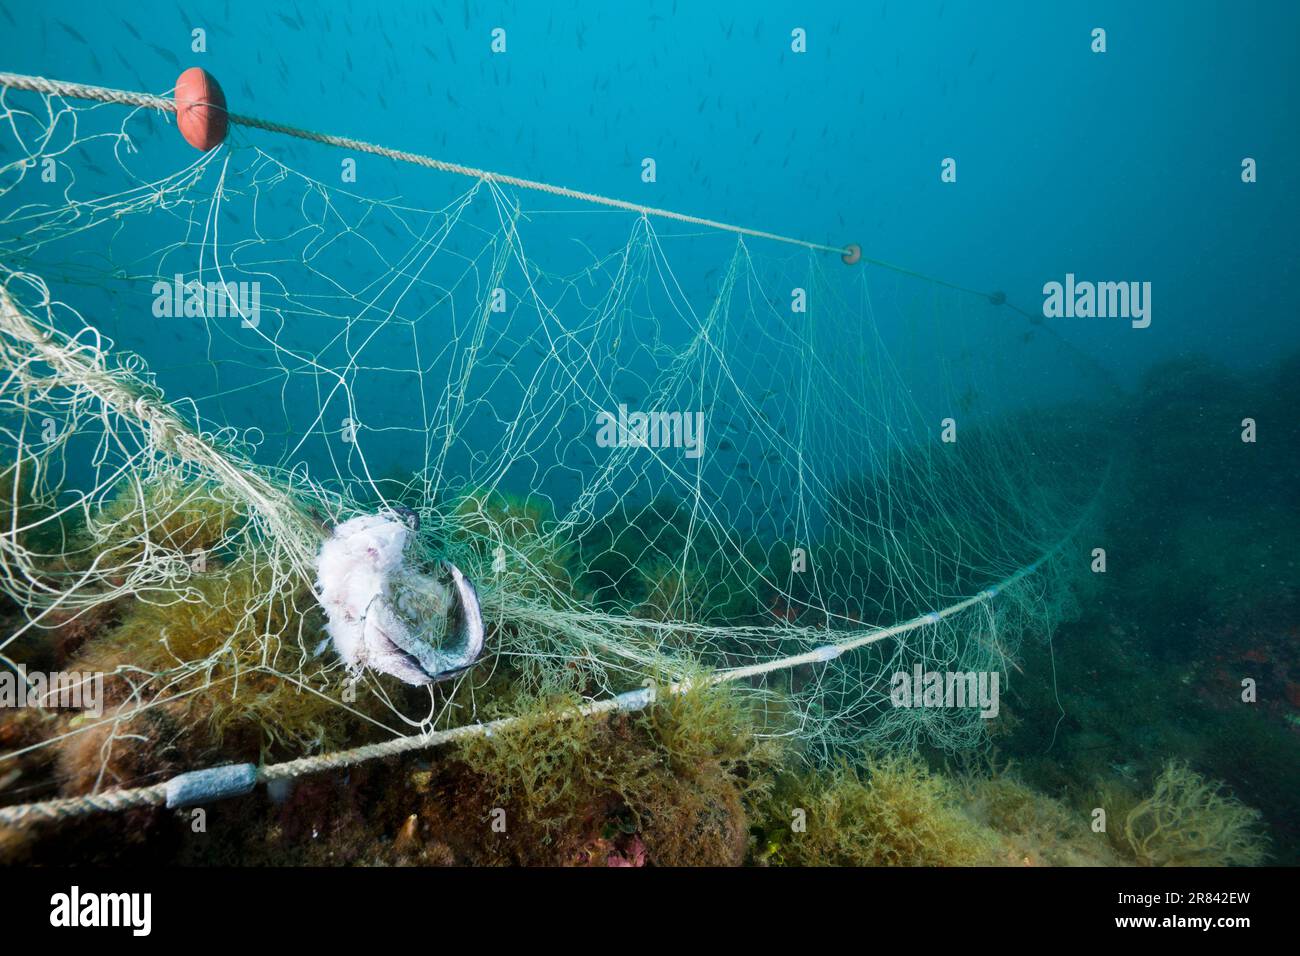 Lost fishing net floating in the sea - Stock Image - C048/8416